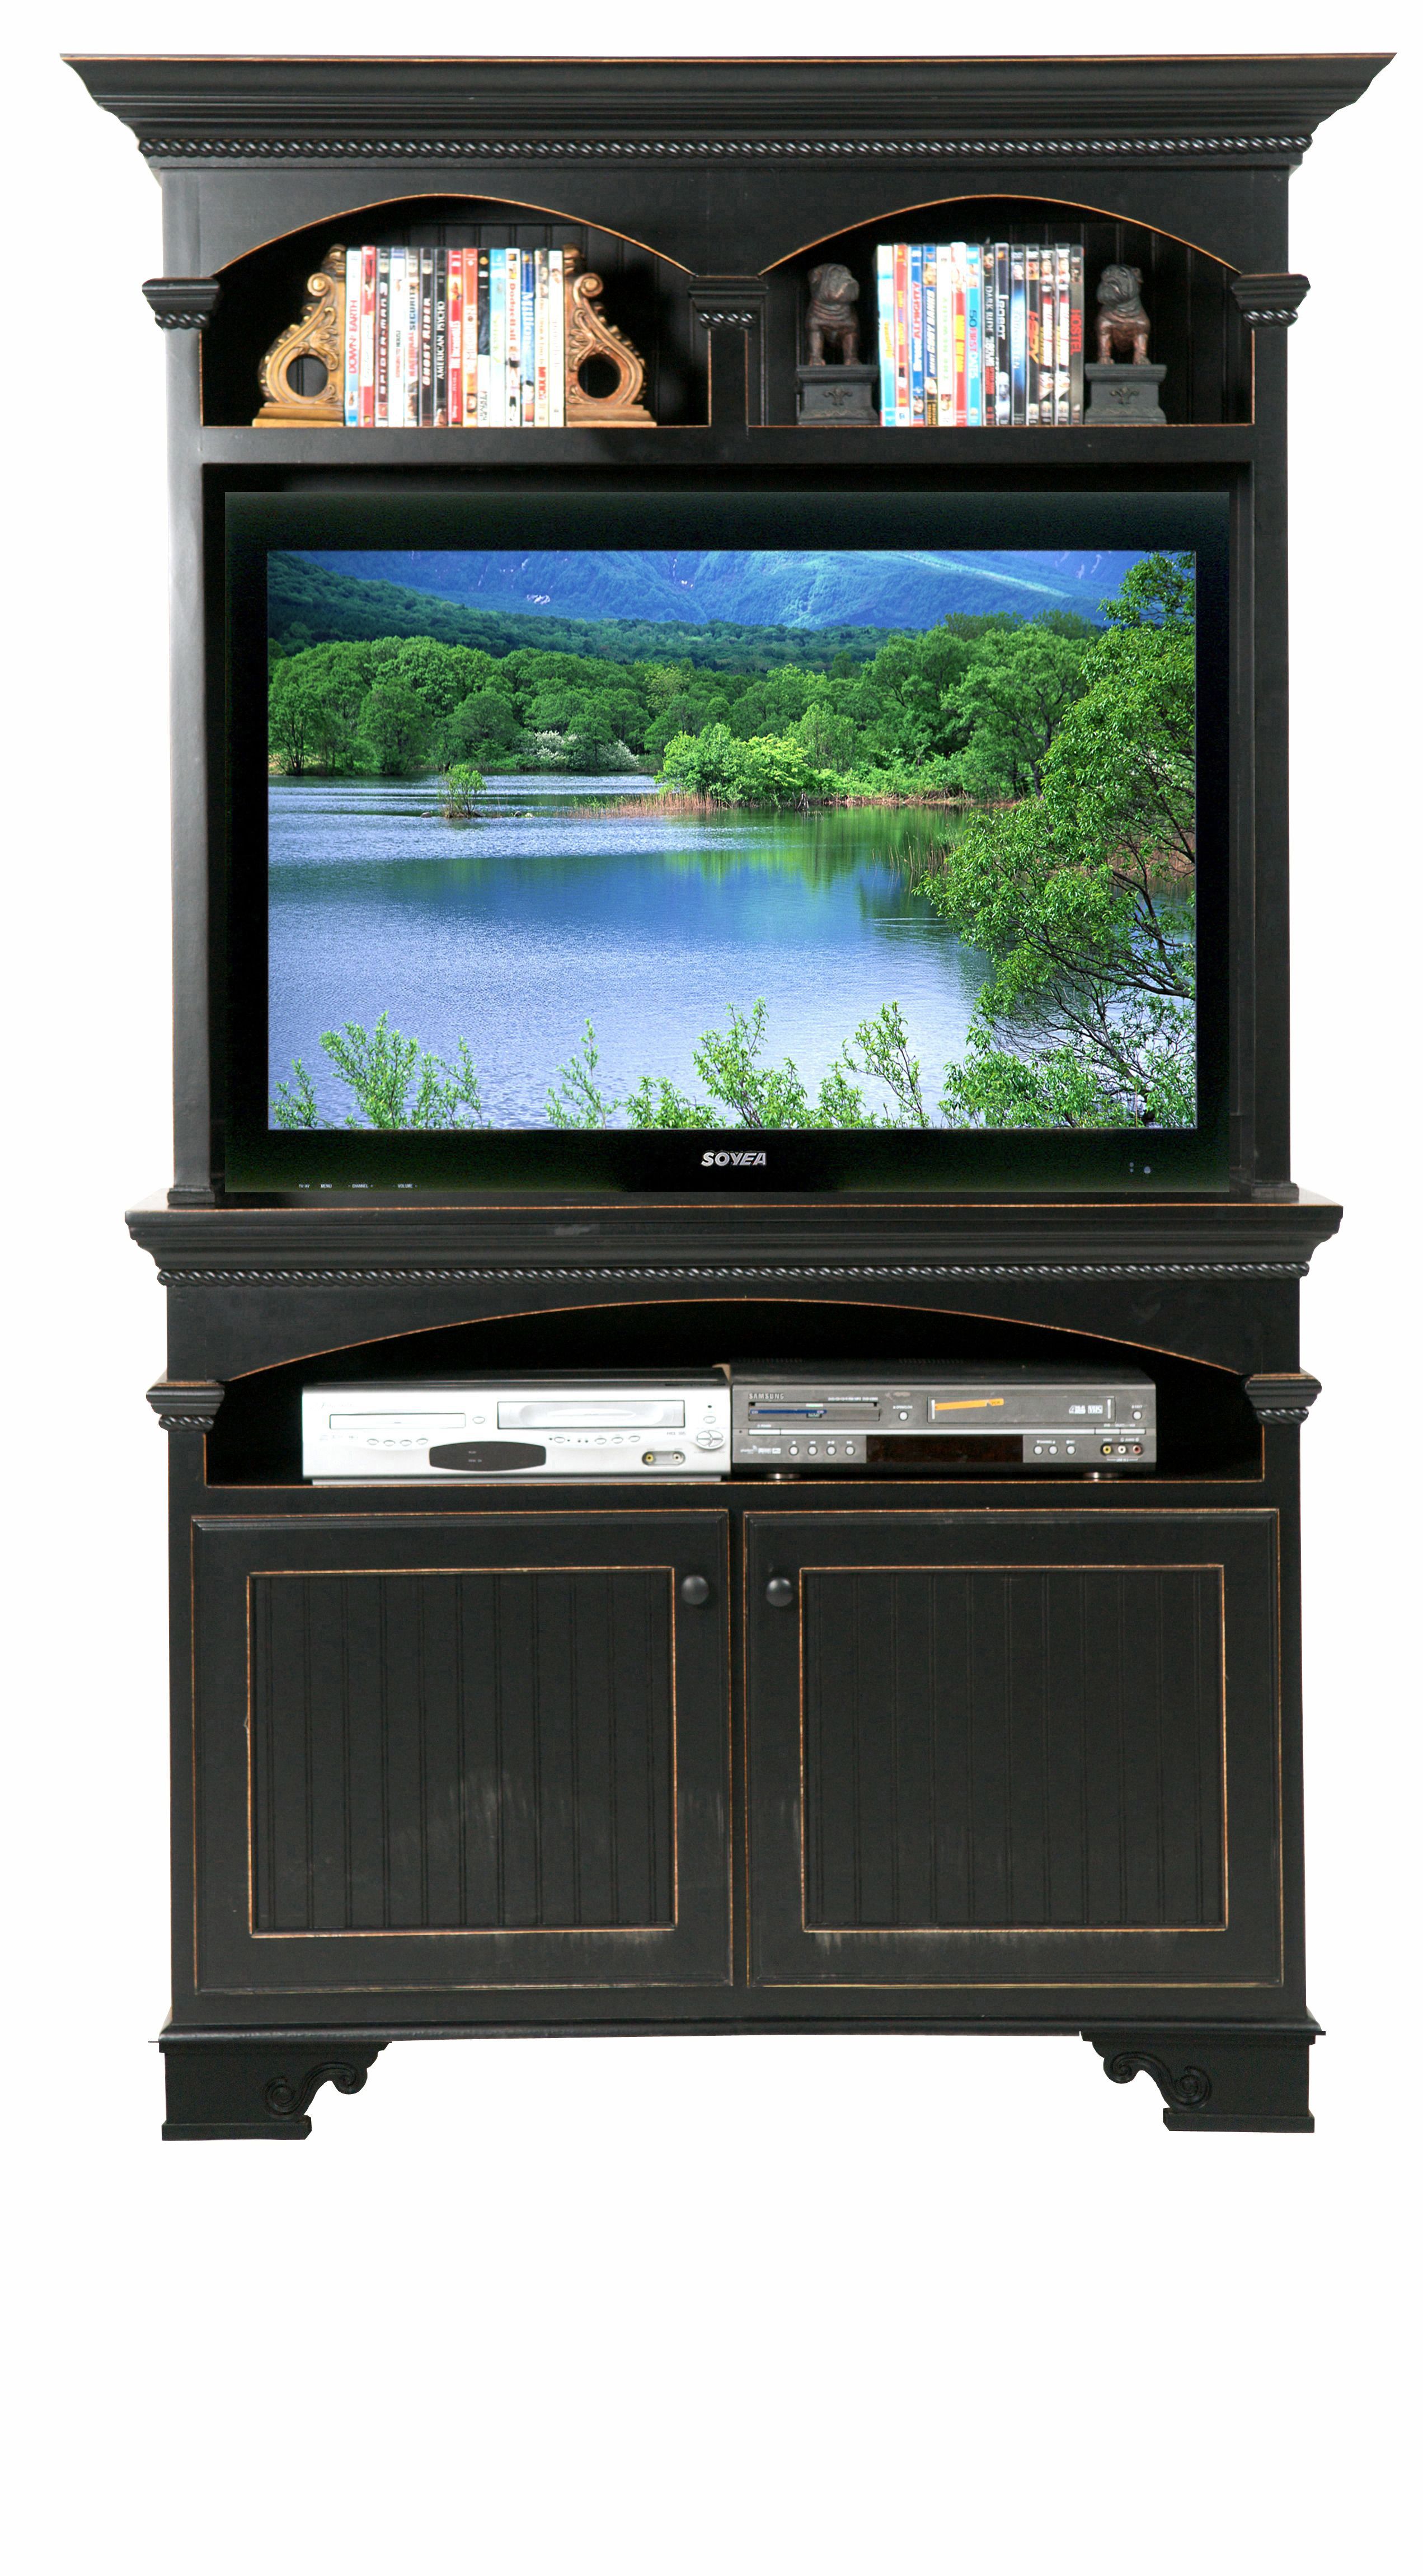 Tv Stands With Hutch You'll Love | Wayfair Regarding Kilian Grey 74 Inch Tv Stands (View 8 of 30)